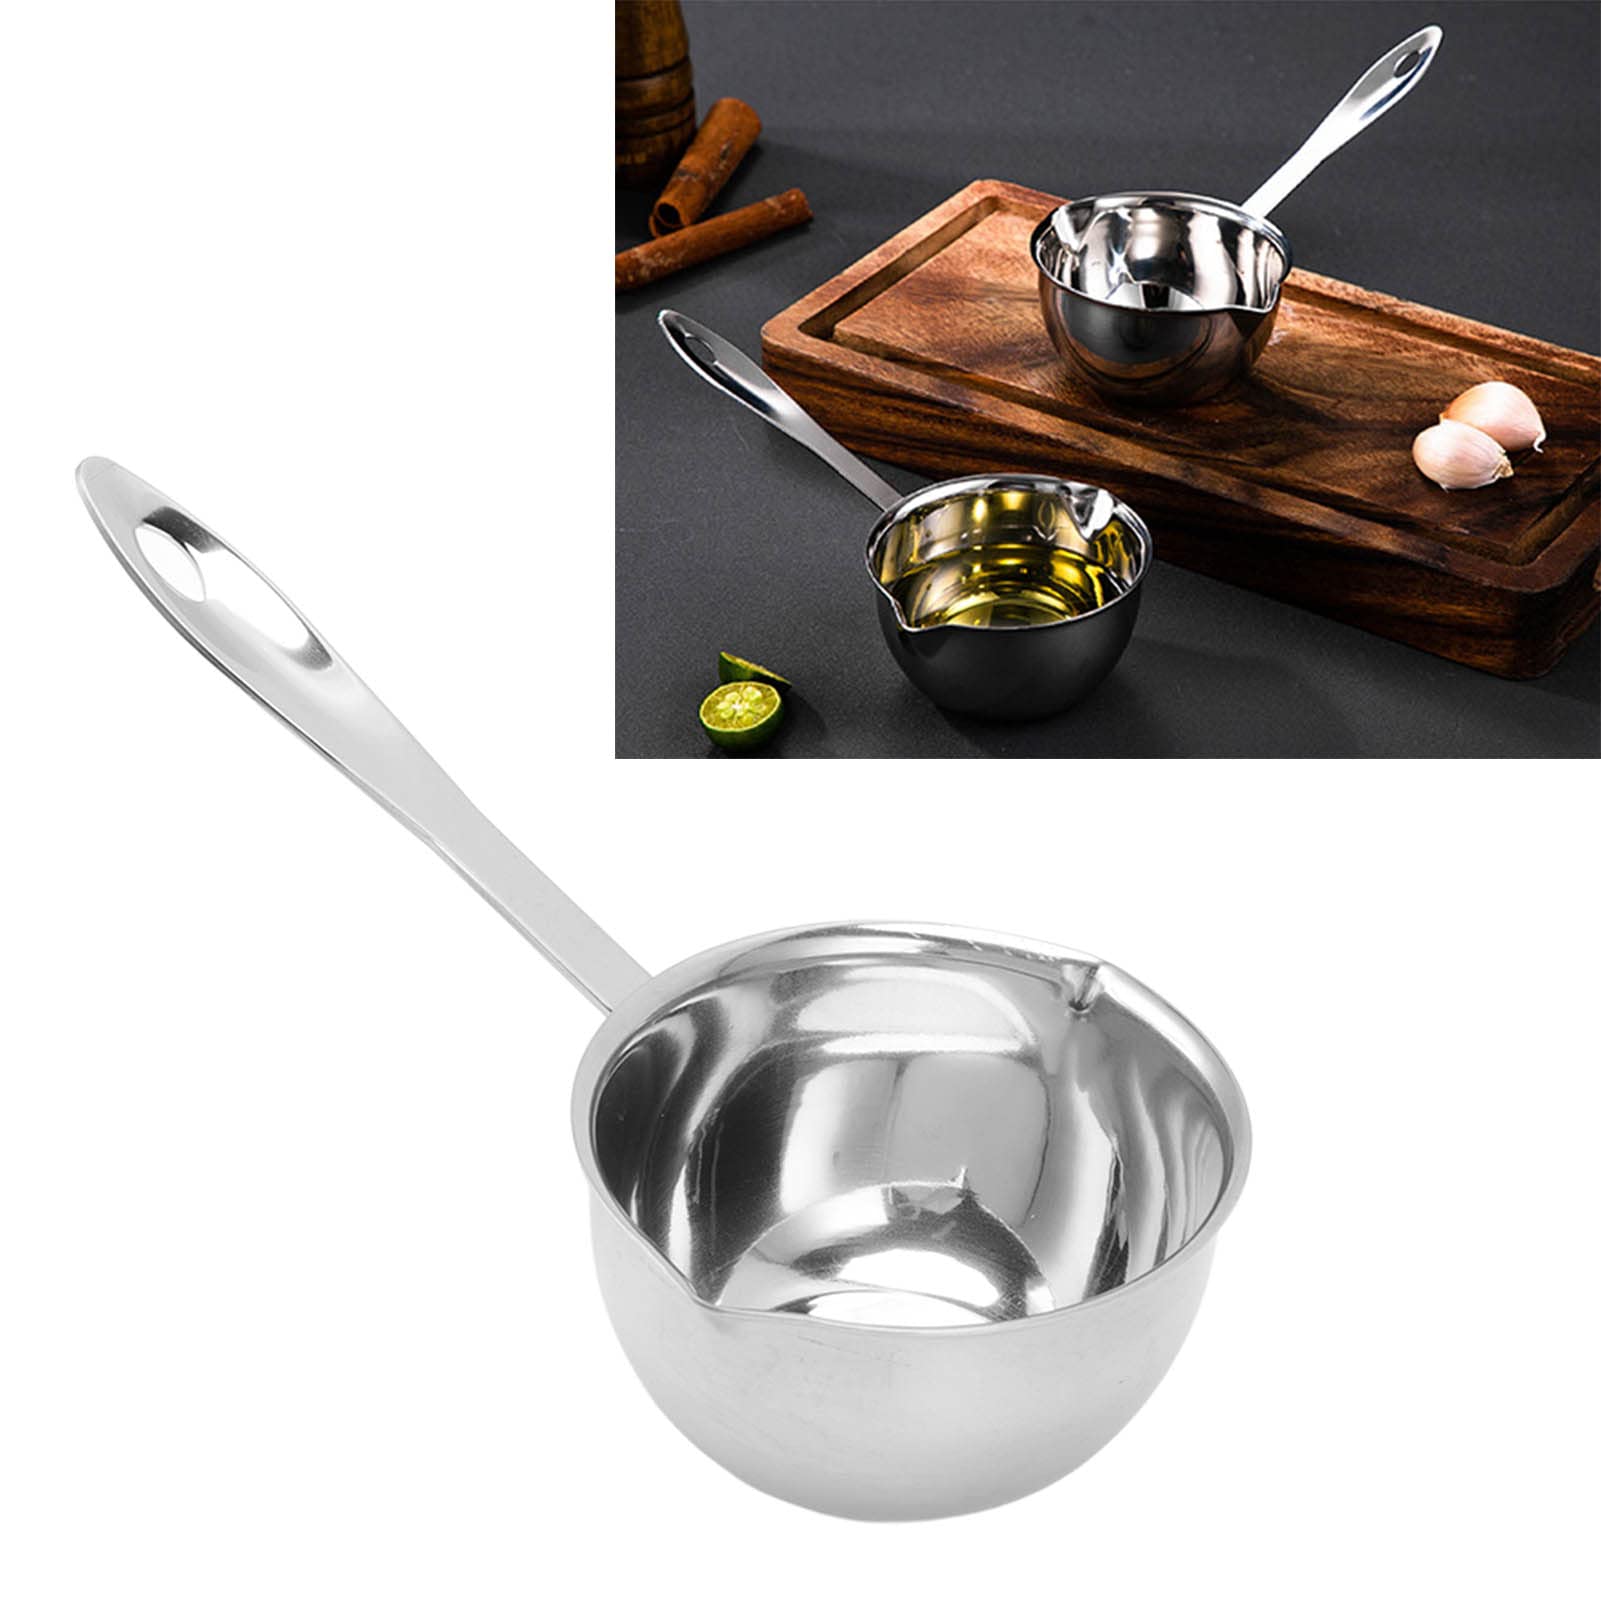 Pilipane Small Induction Milk Pan for Boiling Milk, Sauces, Gravies, Pasta - Stainless Steel Mini Pot With Flat Bottom, 150ML